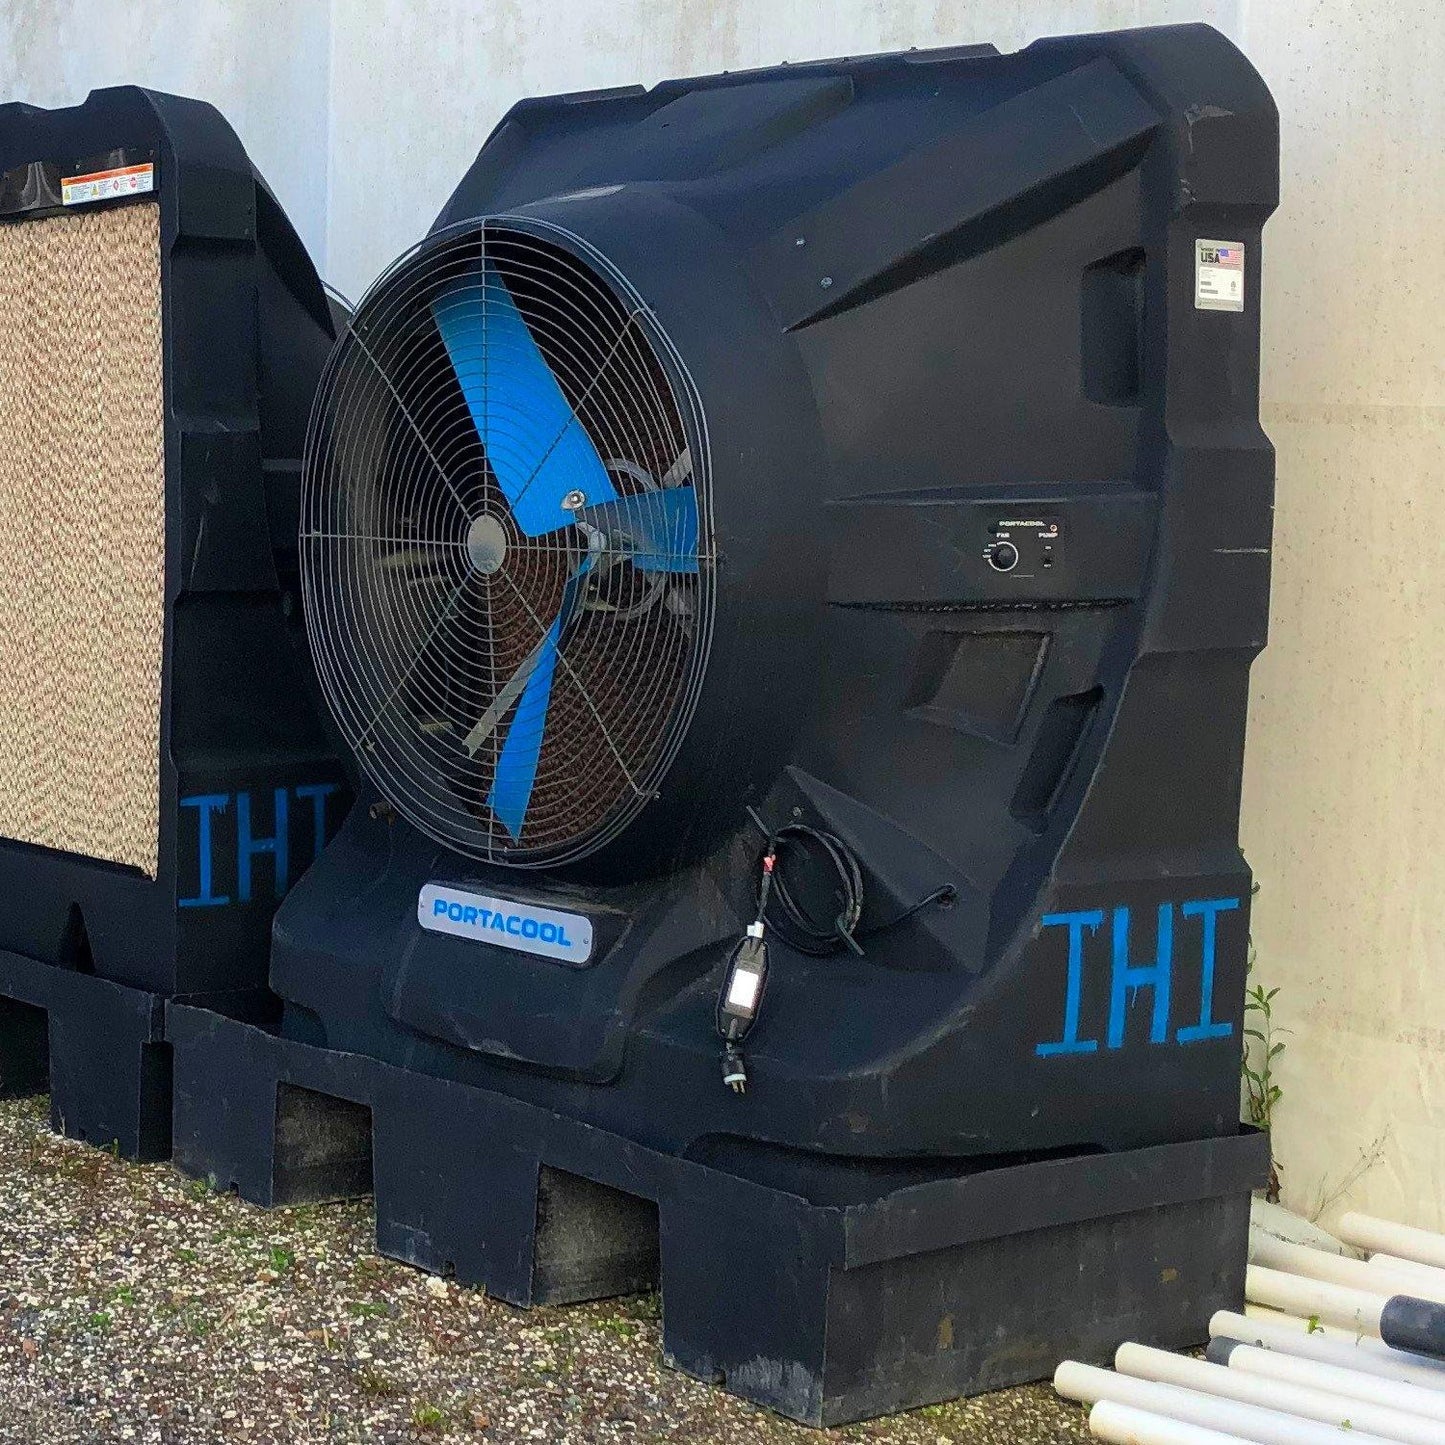 Port-a-Cool 48" Viable Speed Portable Evaporative Cooler - General Equipment & Supply